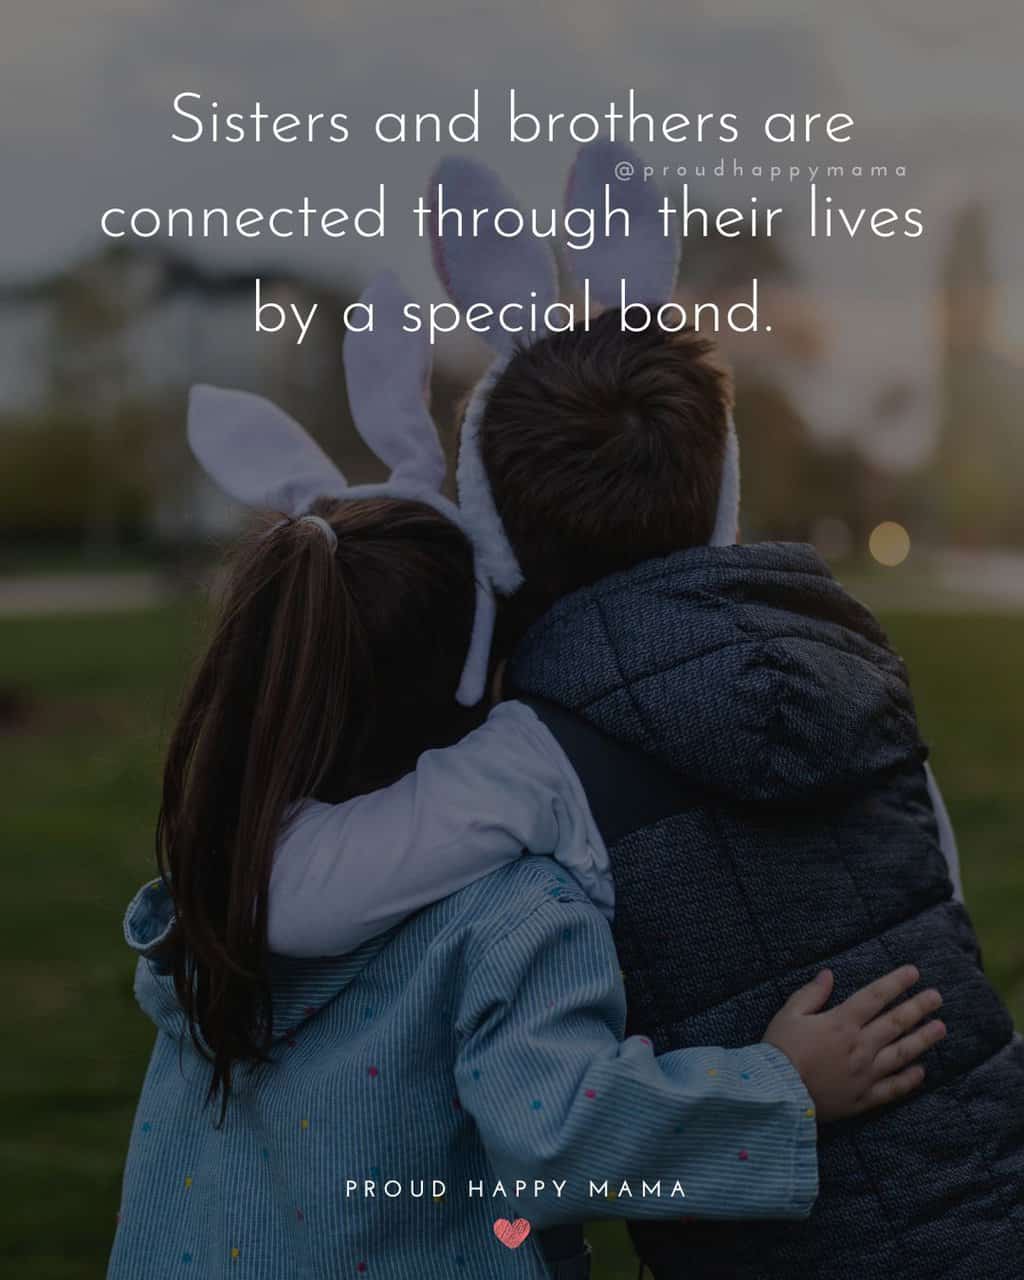 quotes about sisters - sisters and brothers are connected through their lives by a special bond